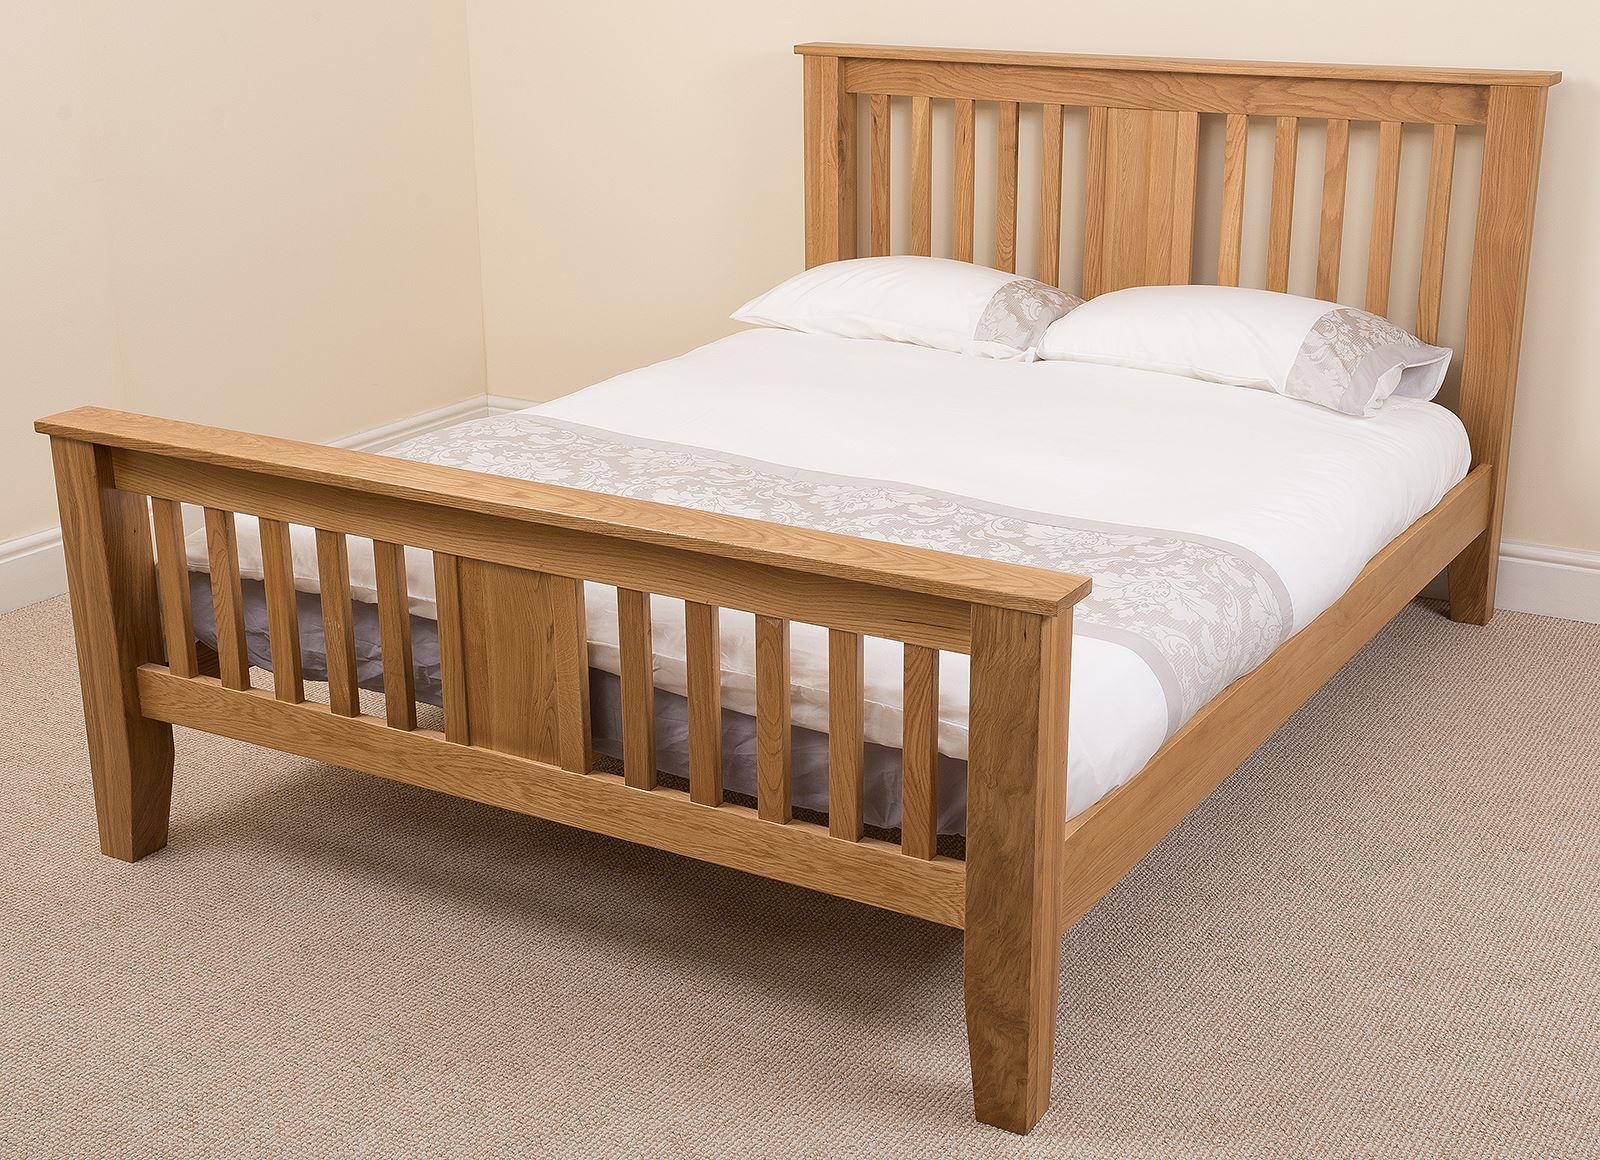 4ft small double bed and mattress wooden